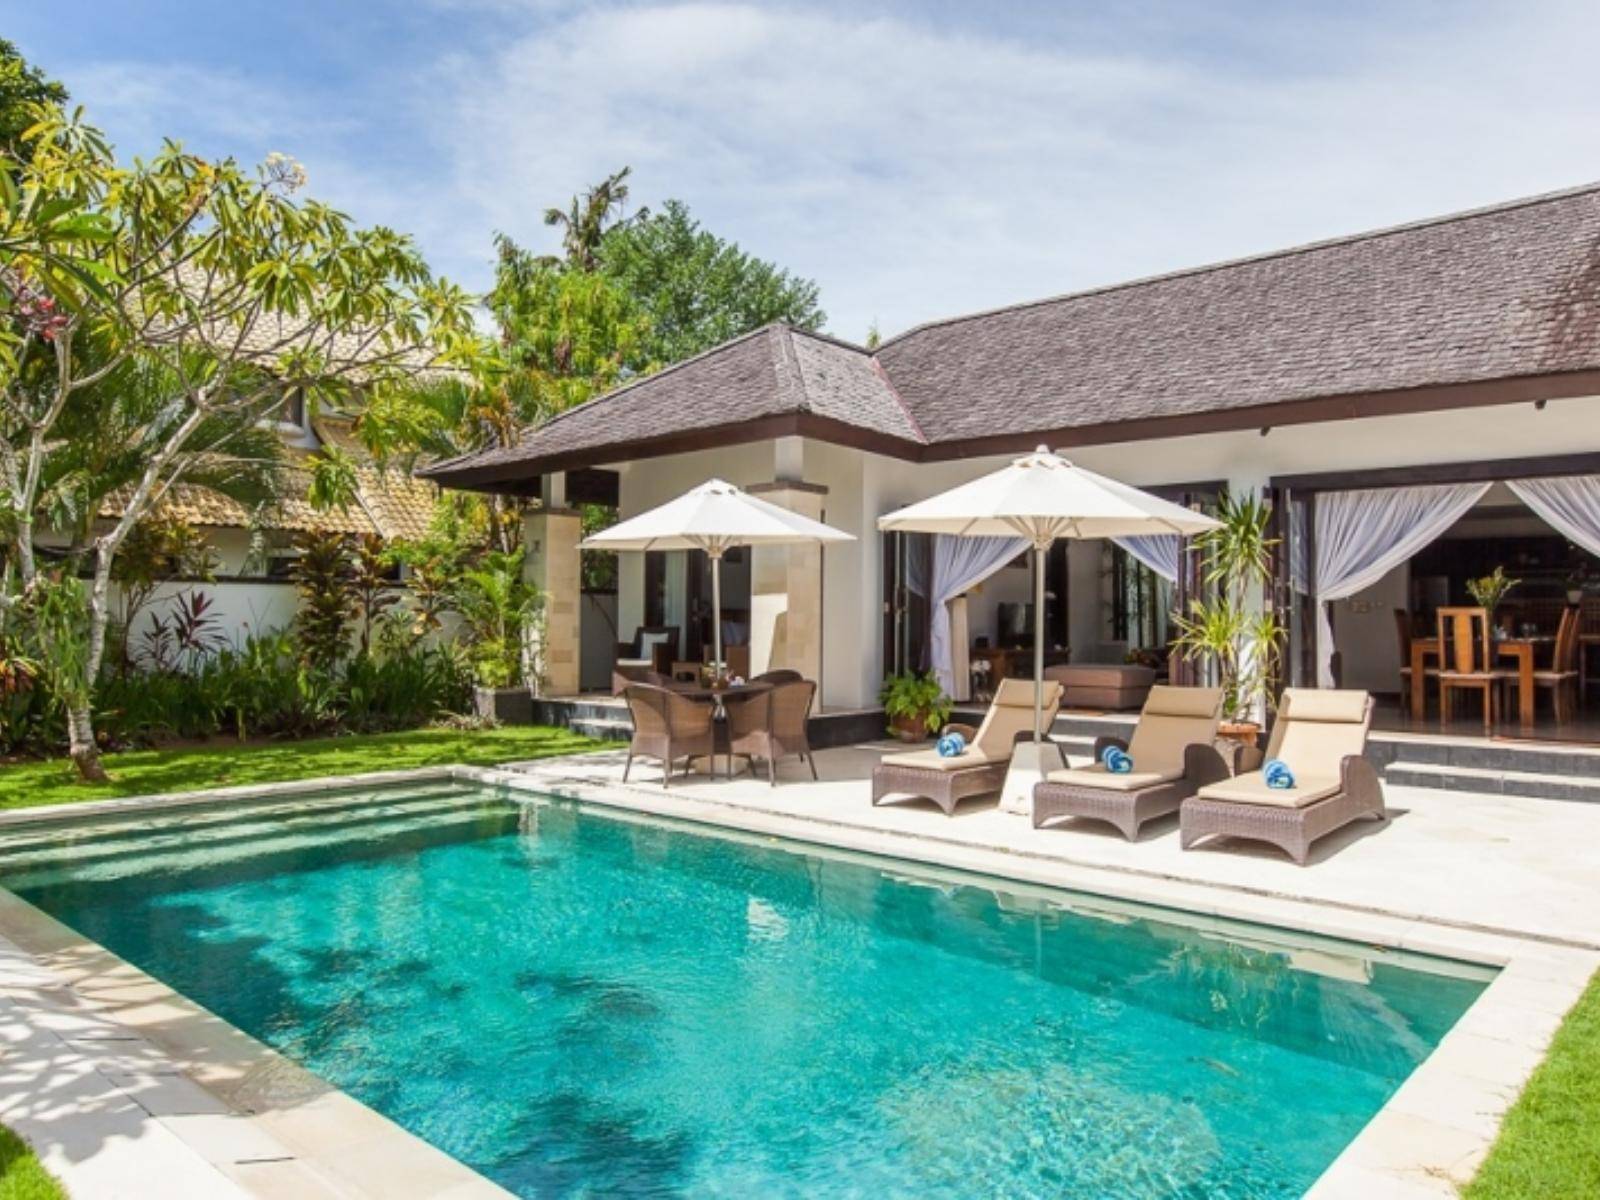 Bali villas for sale | luxurious, affordable, primary location | kibarer property